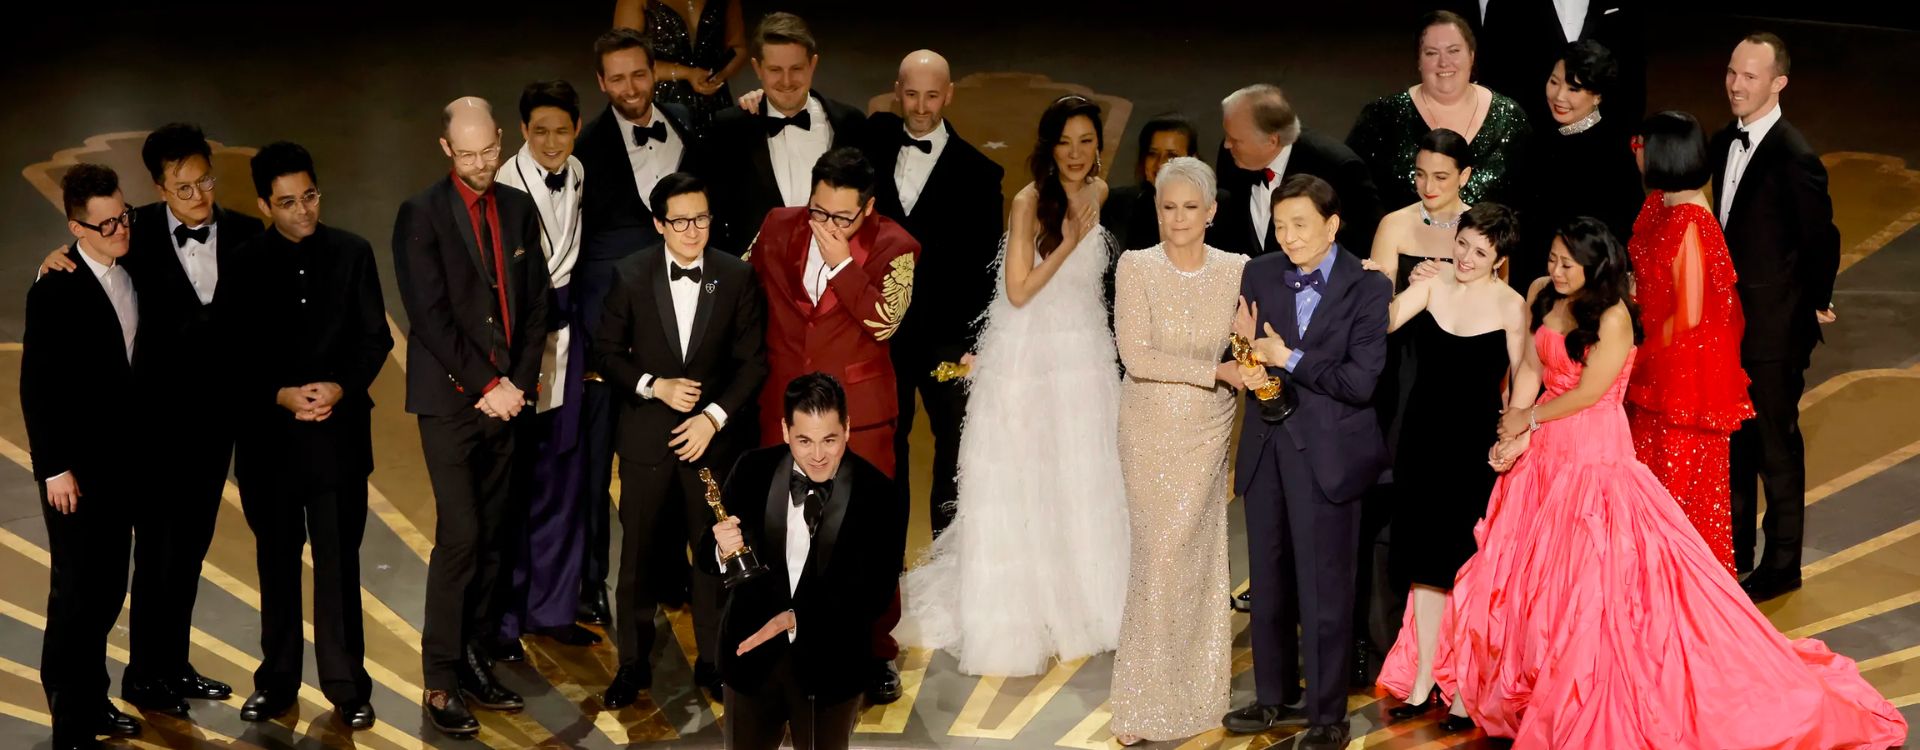 Oscar 2023: il Miglior film è “Everything Everywhere All at Once”